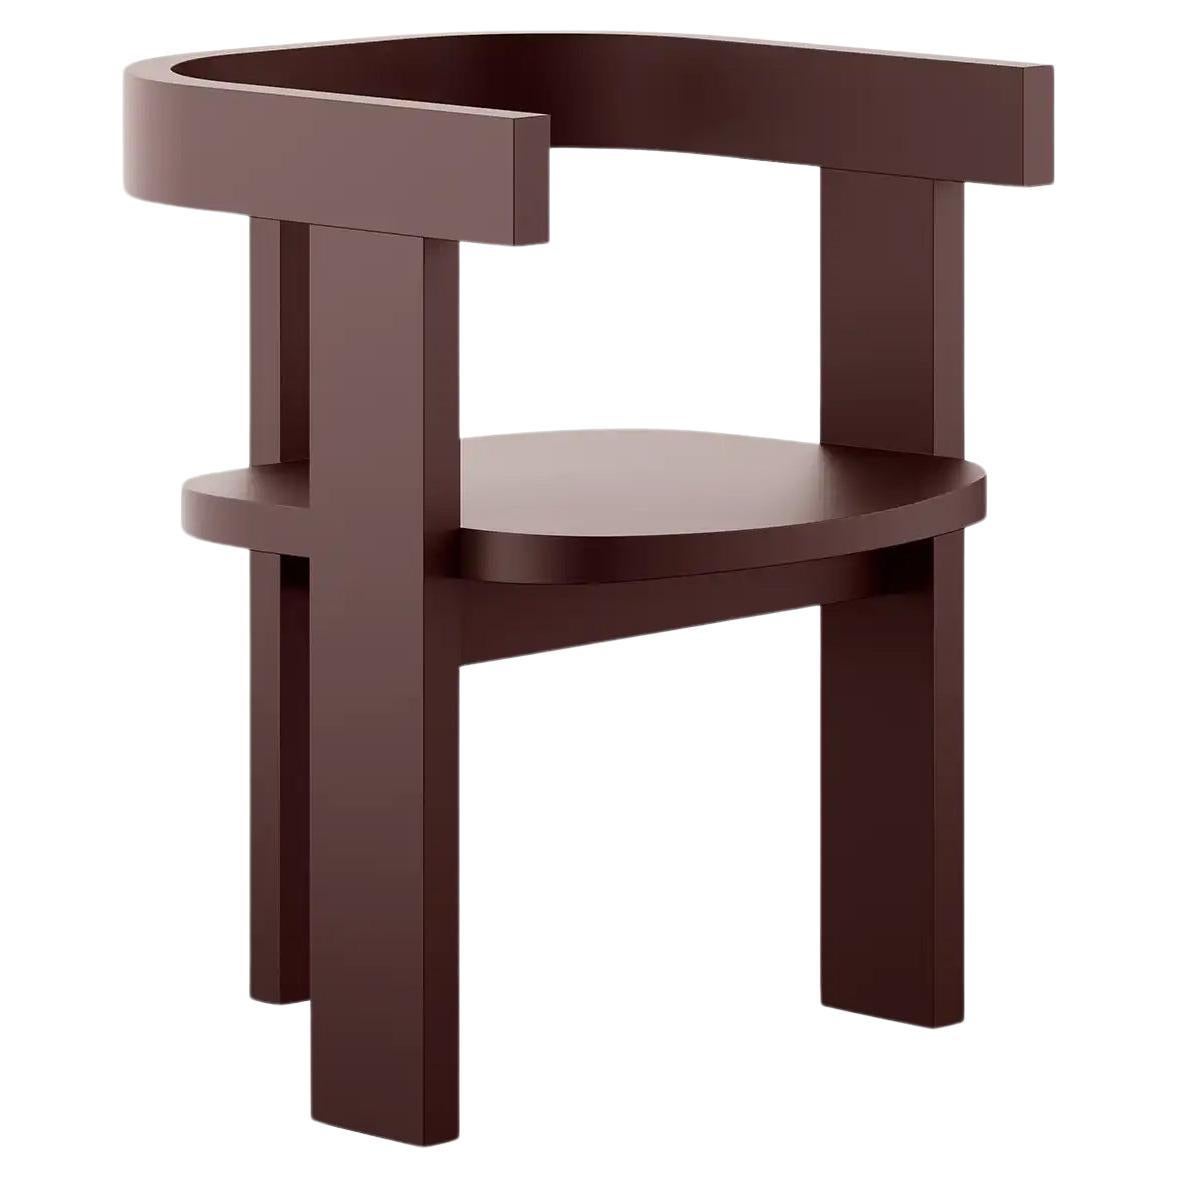 Scandinavian Modern Wood Dining Chair Dark Red Brown, Rouge Noire Matte Lacquer For Sale